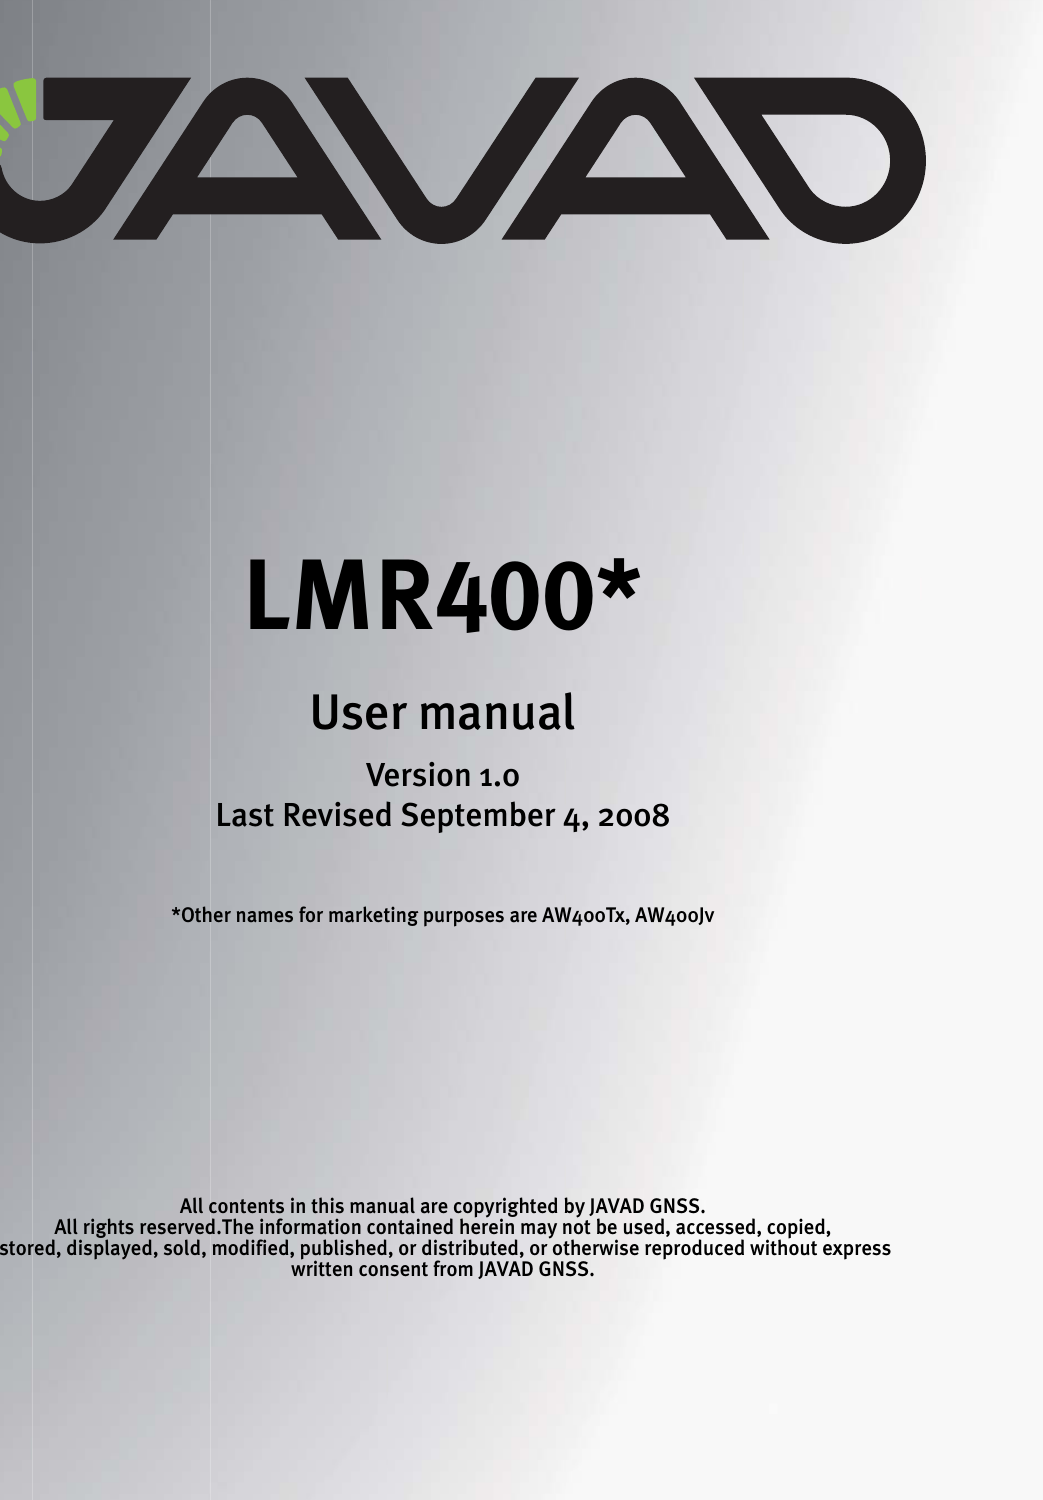 All contents in this manual are copyrighted by JAVAD GNSS.All rights reserved.The information contained herein may not be used, accessed, copied, stored, displayed, sold, modified, published, or distributed, or otherwise reproduced without express written consent from JAVAD GNSS.LMR400*User manualVersion 1.0Last Revised September 4, 2008*Other names for marketing purposes are AW400Tx, AW400Jv